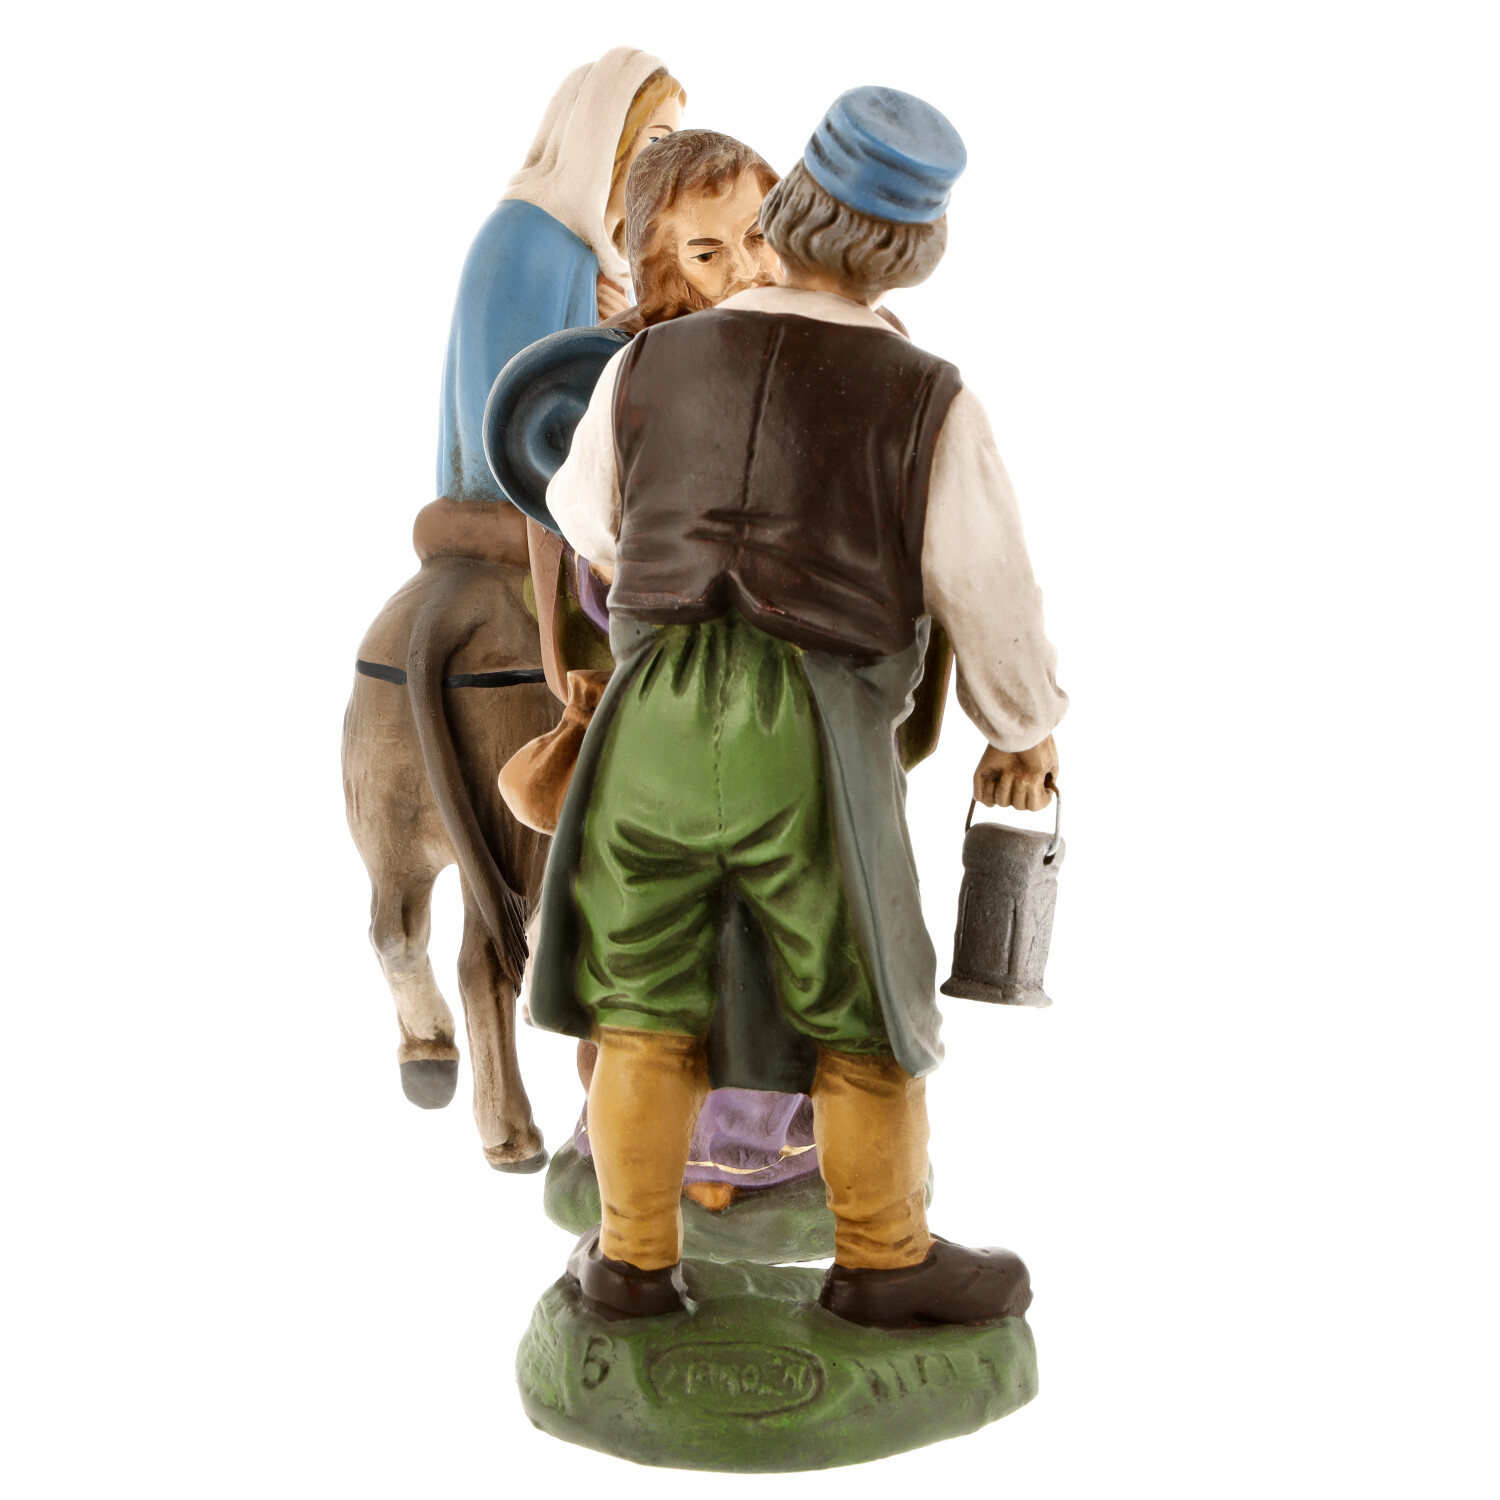 Search for lodging - Marolin Nativity figures - made in Germany